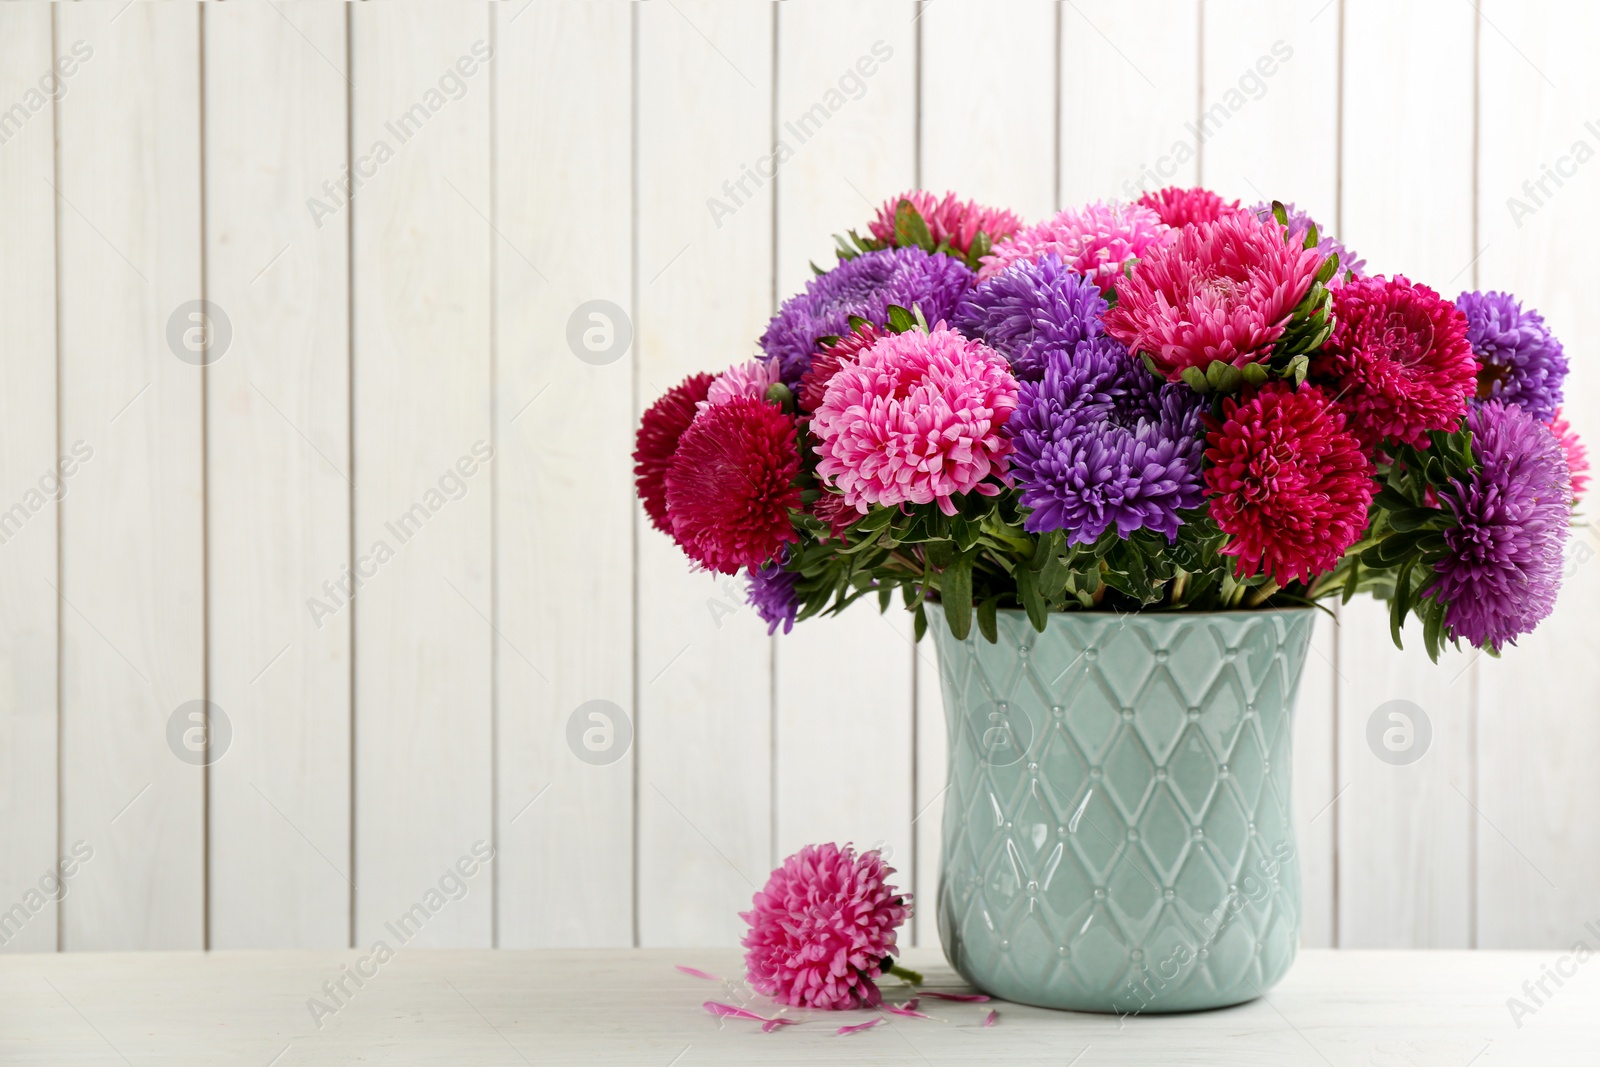 Photo of Beautiful asters in vase on table against white wooden background, space for text. Autumn flowers